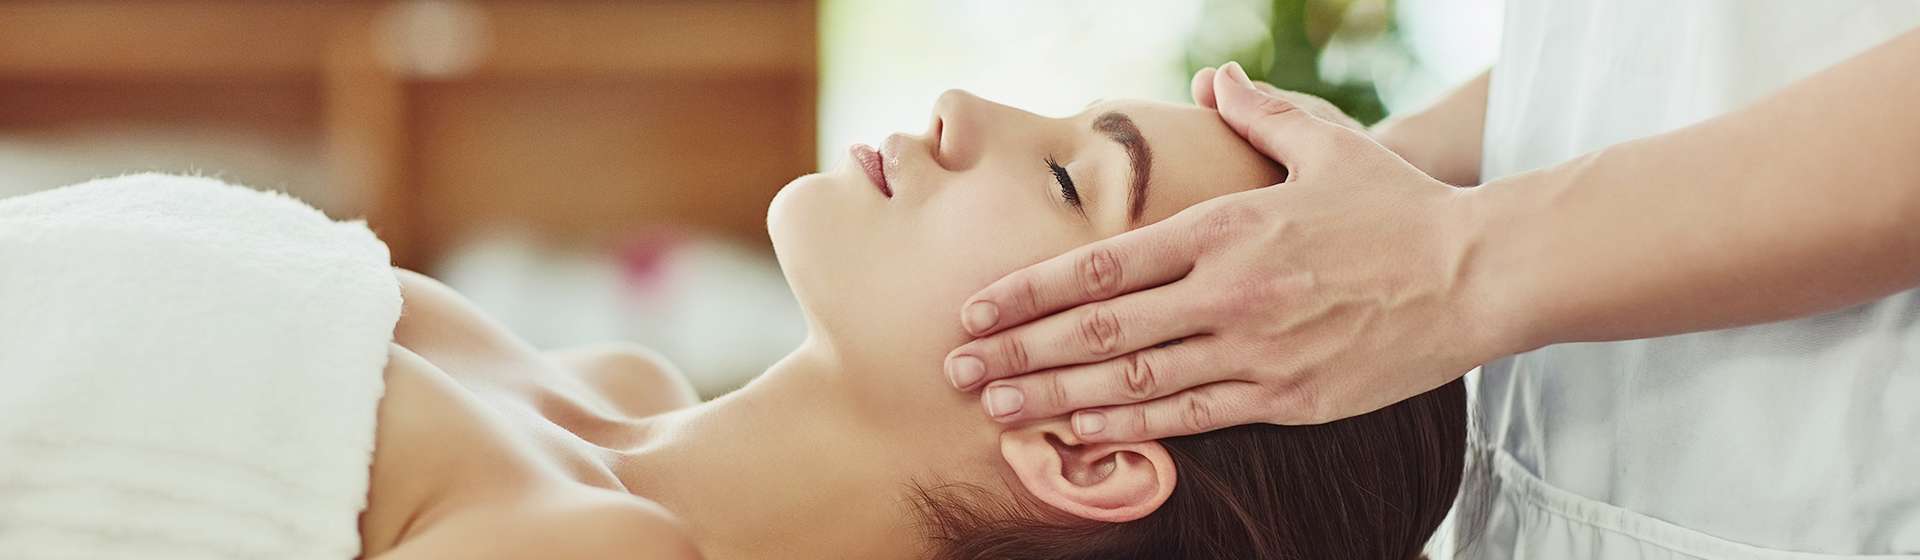 The Beauty of Lymphatic Drainage